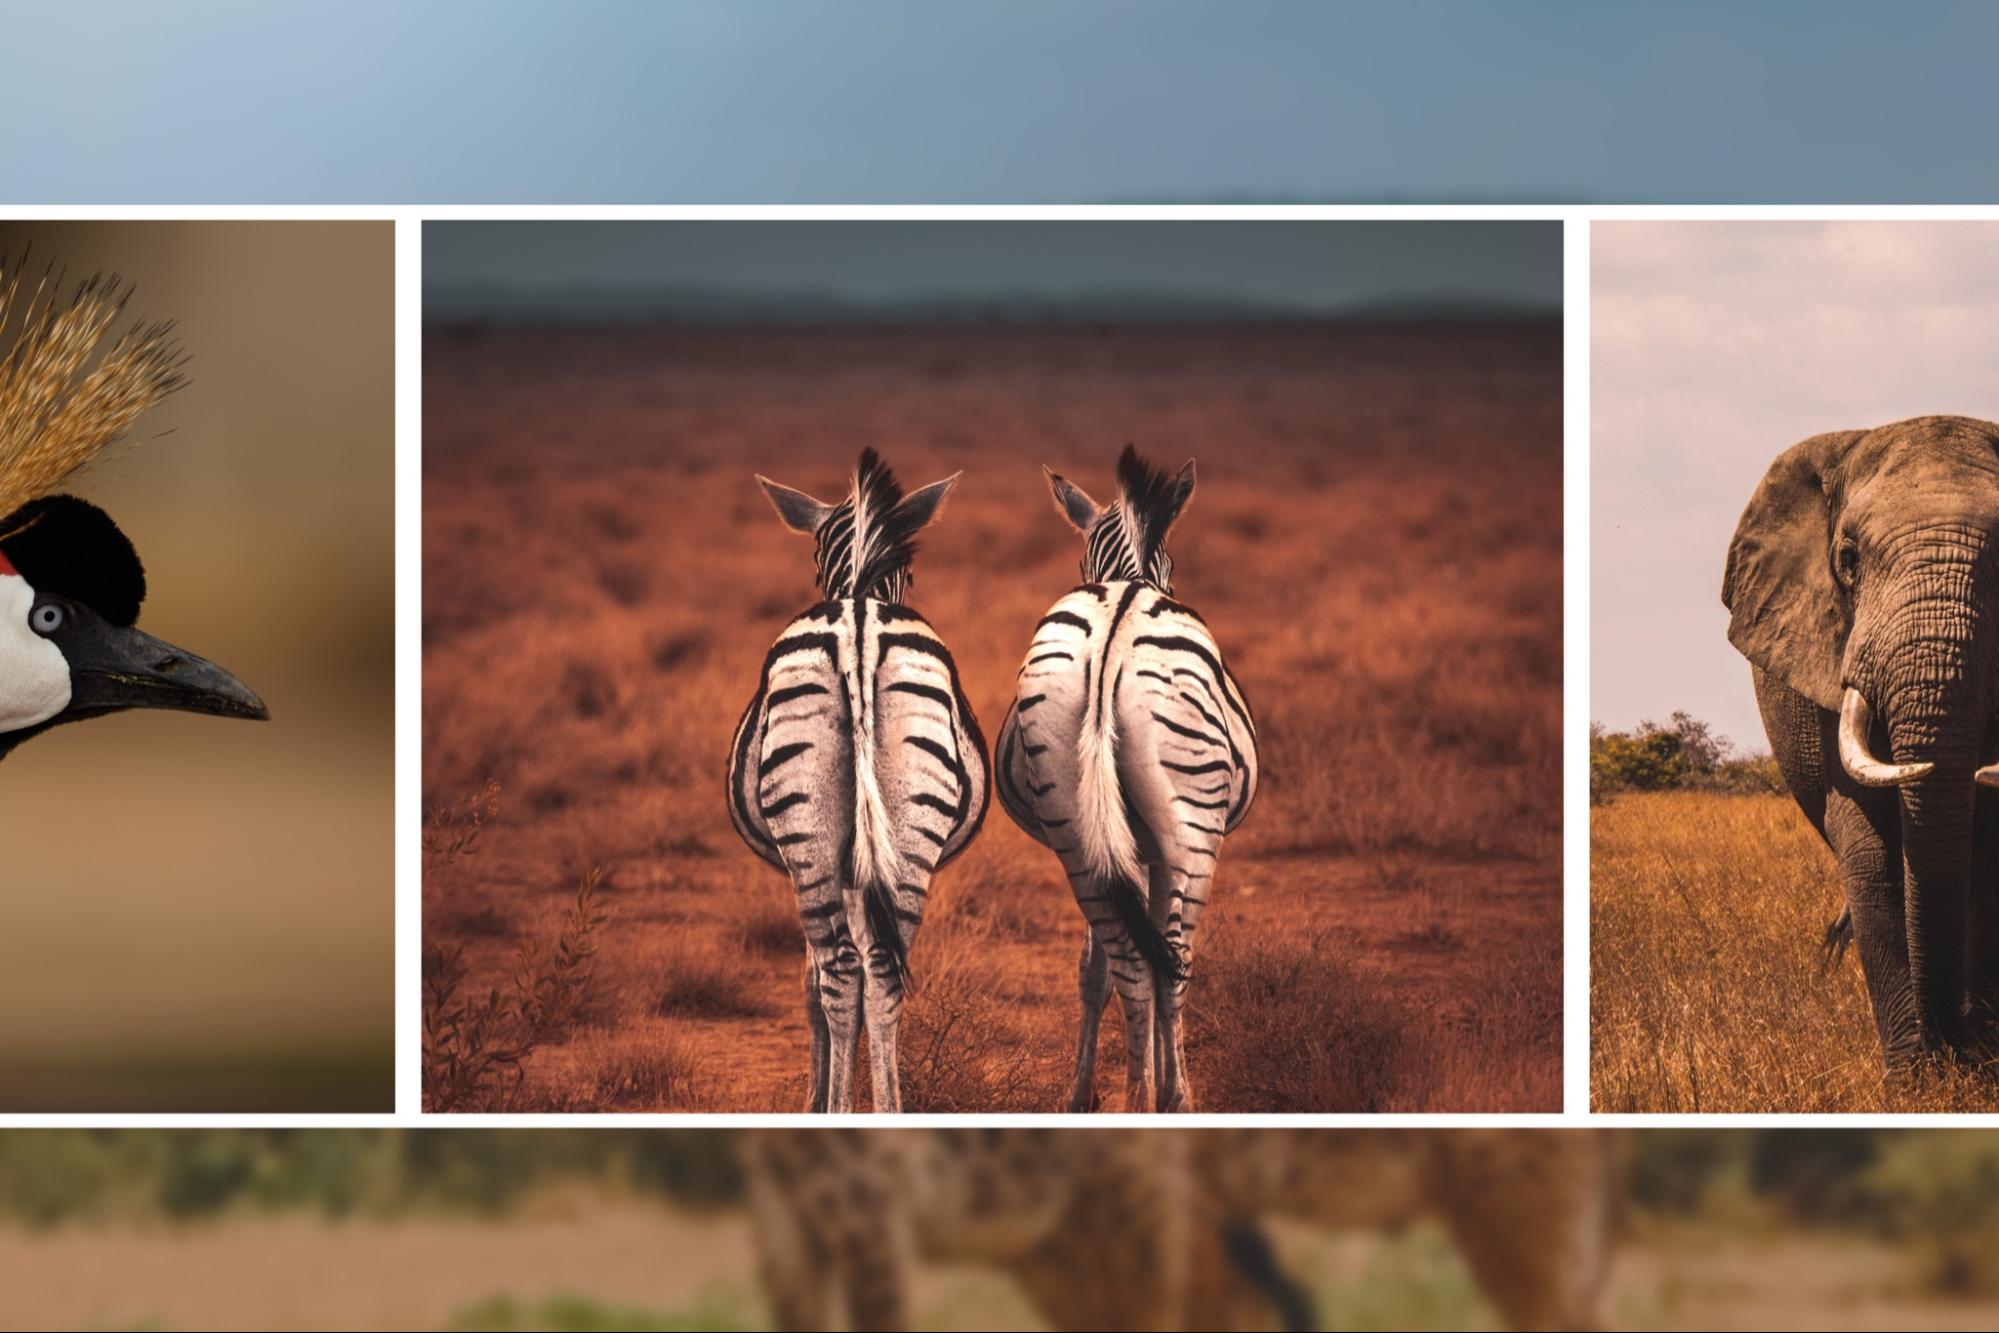 A gallery of wildlife photos: a bird with a black bill and orange crest on the left, two zebras viewed from behind in the center, and an elephant facing the camera on the right. Photos by Harshil Gudka, Roi Dimor, Geran De Klerk, Aj Robbie.